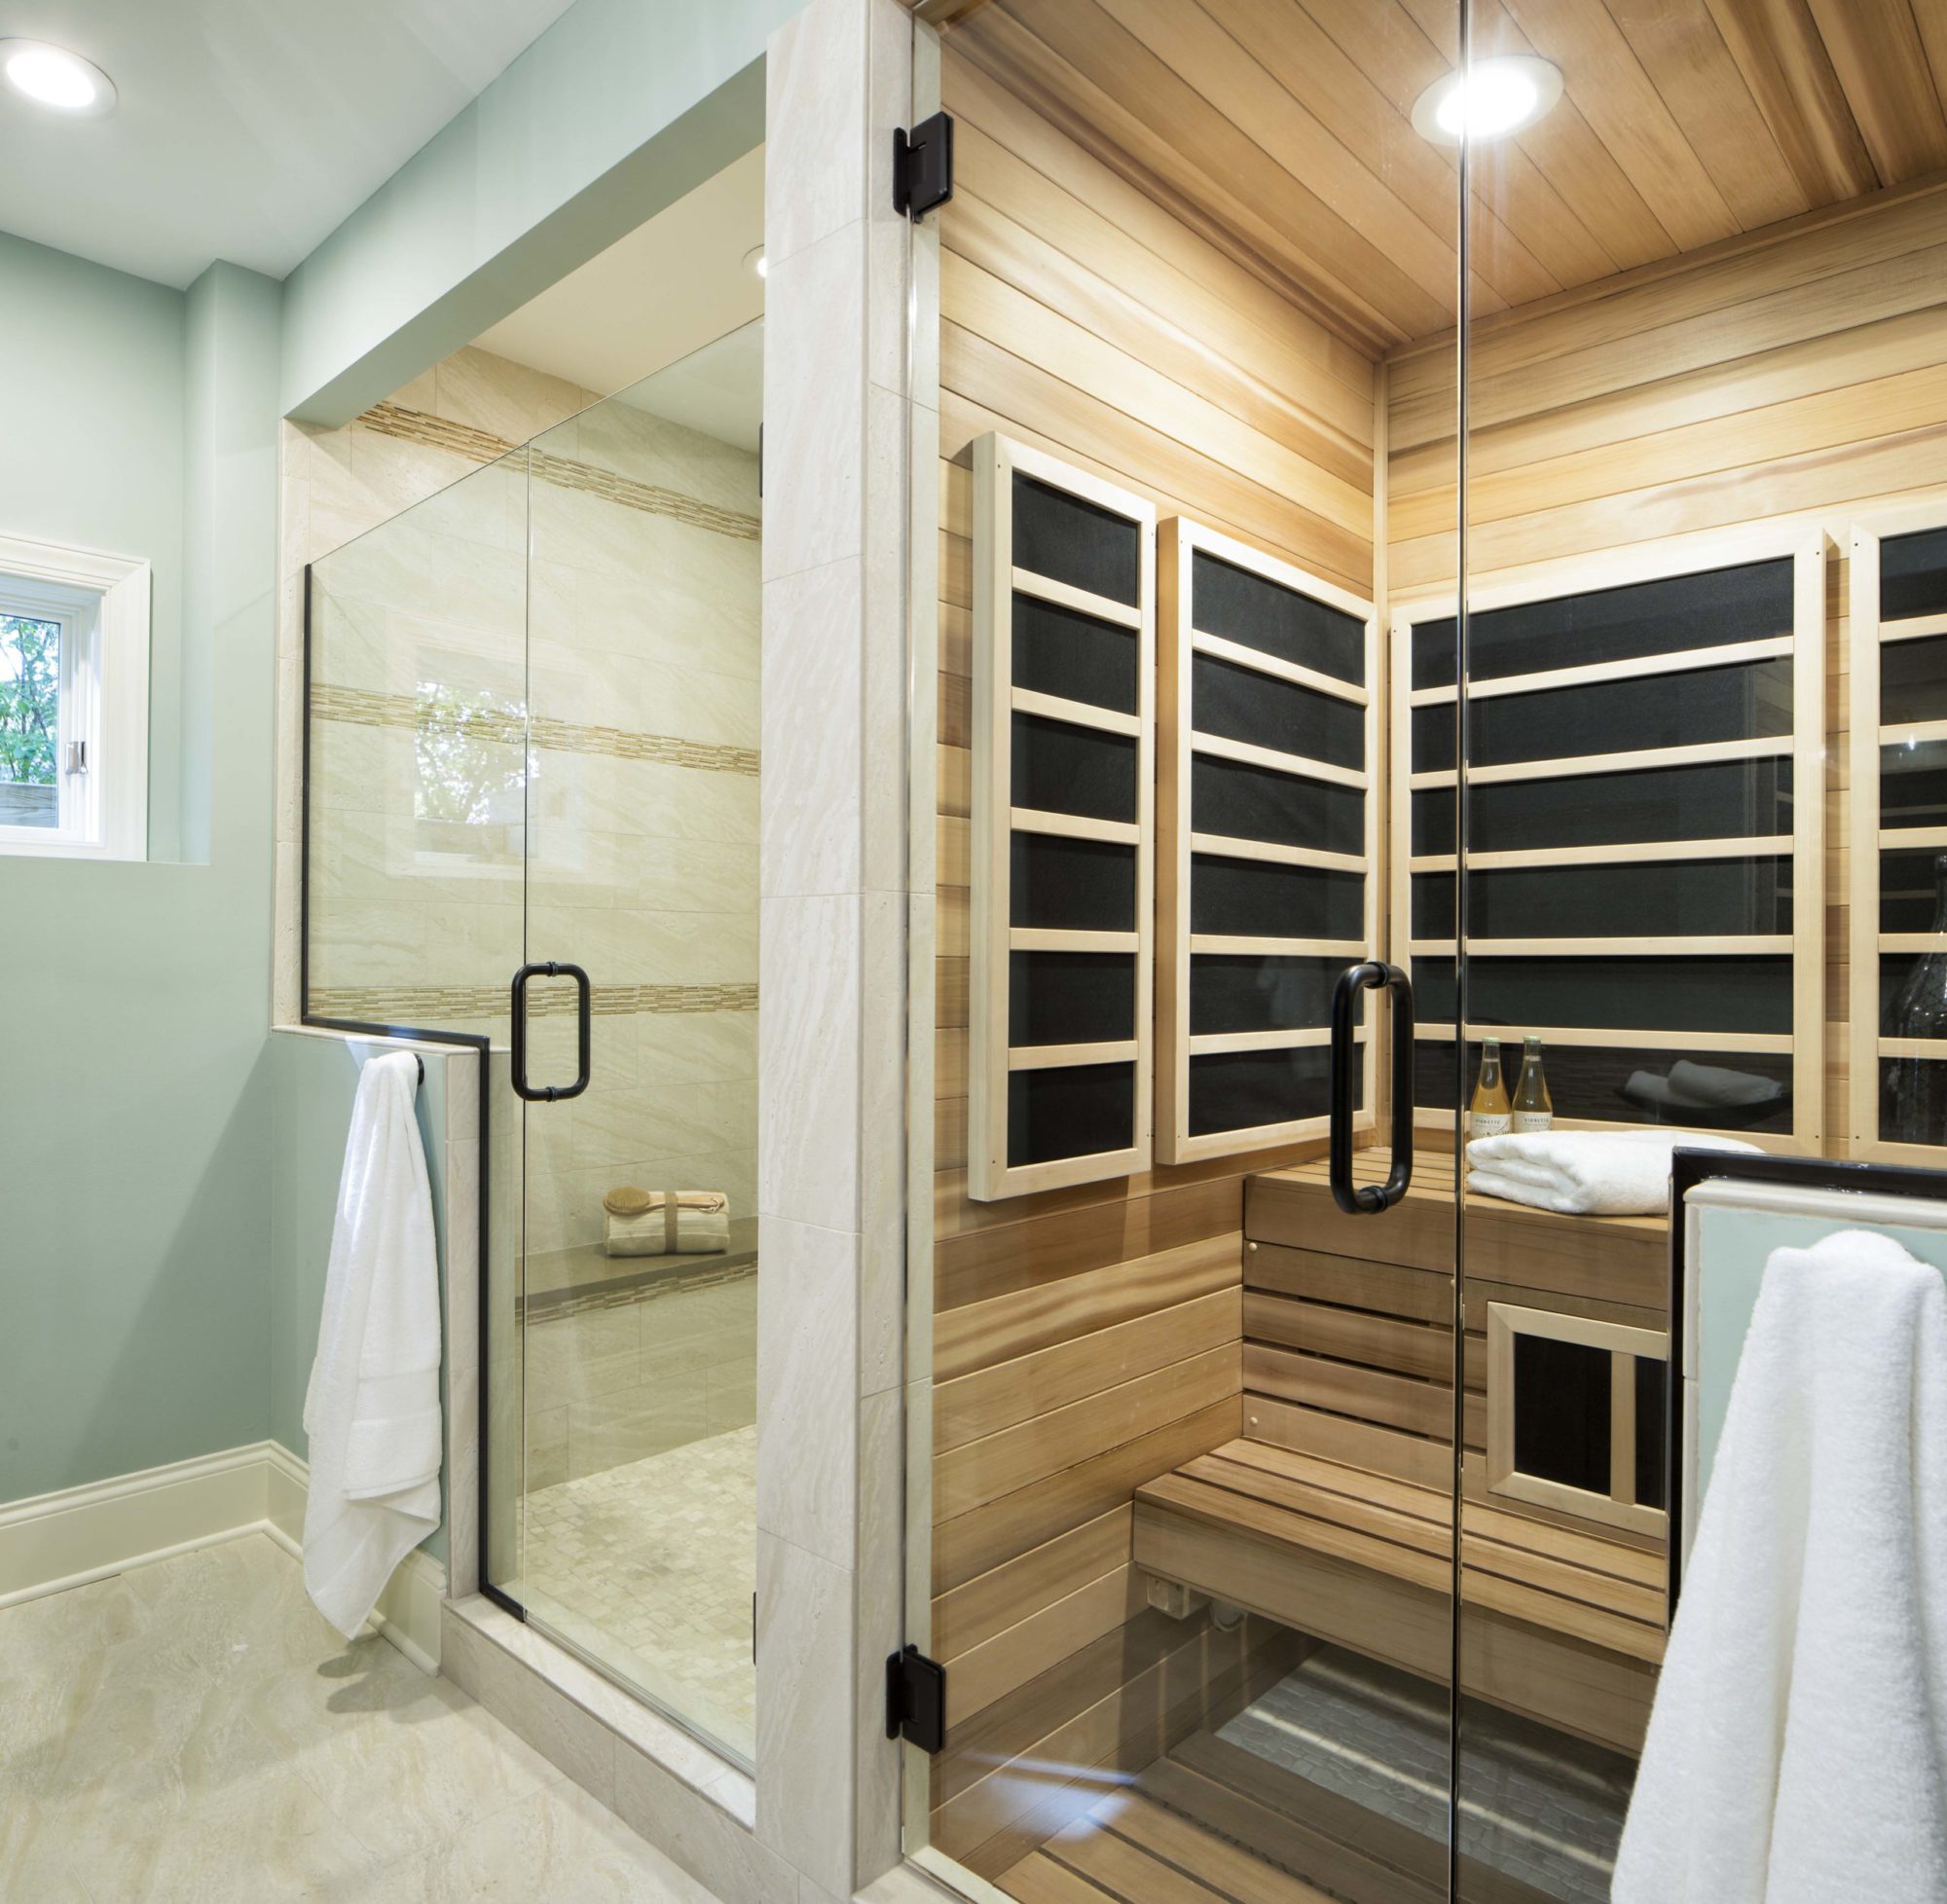 Edina remodel featuring a luxurious bathroom with a sauna and a stunning glass shower.